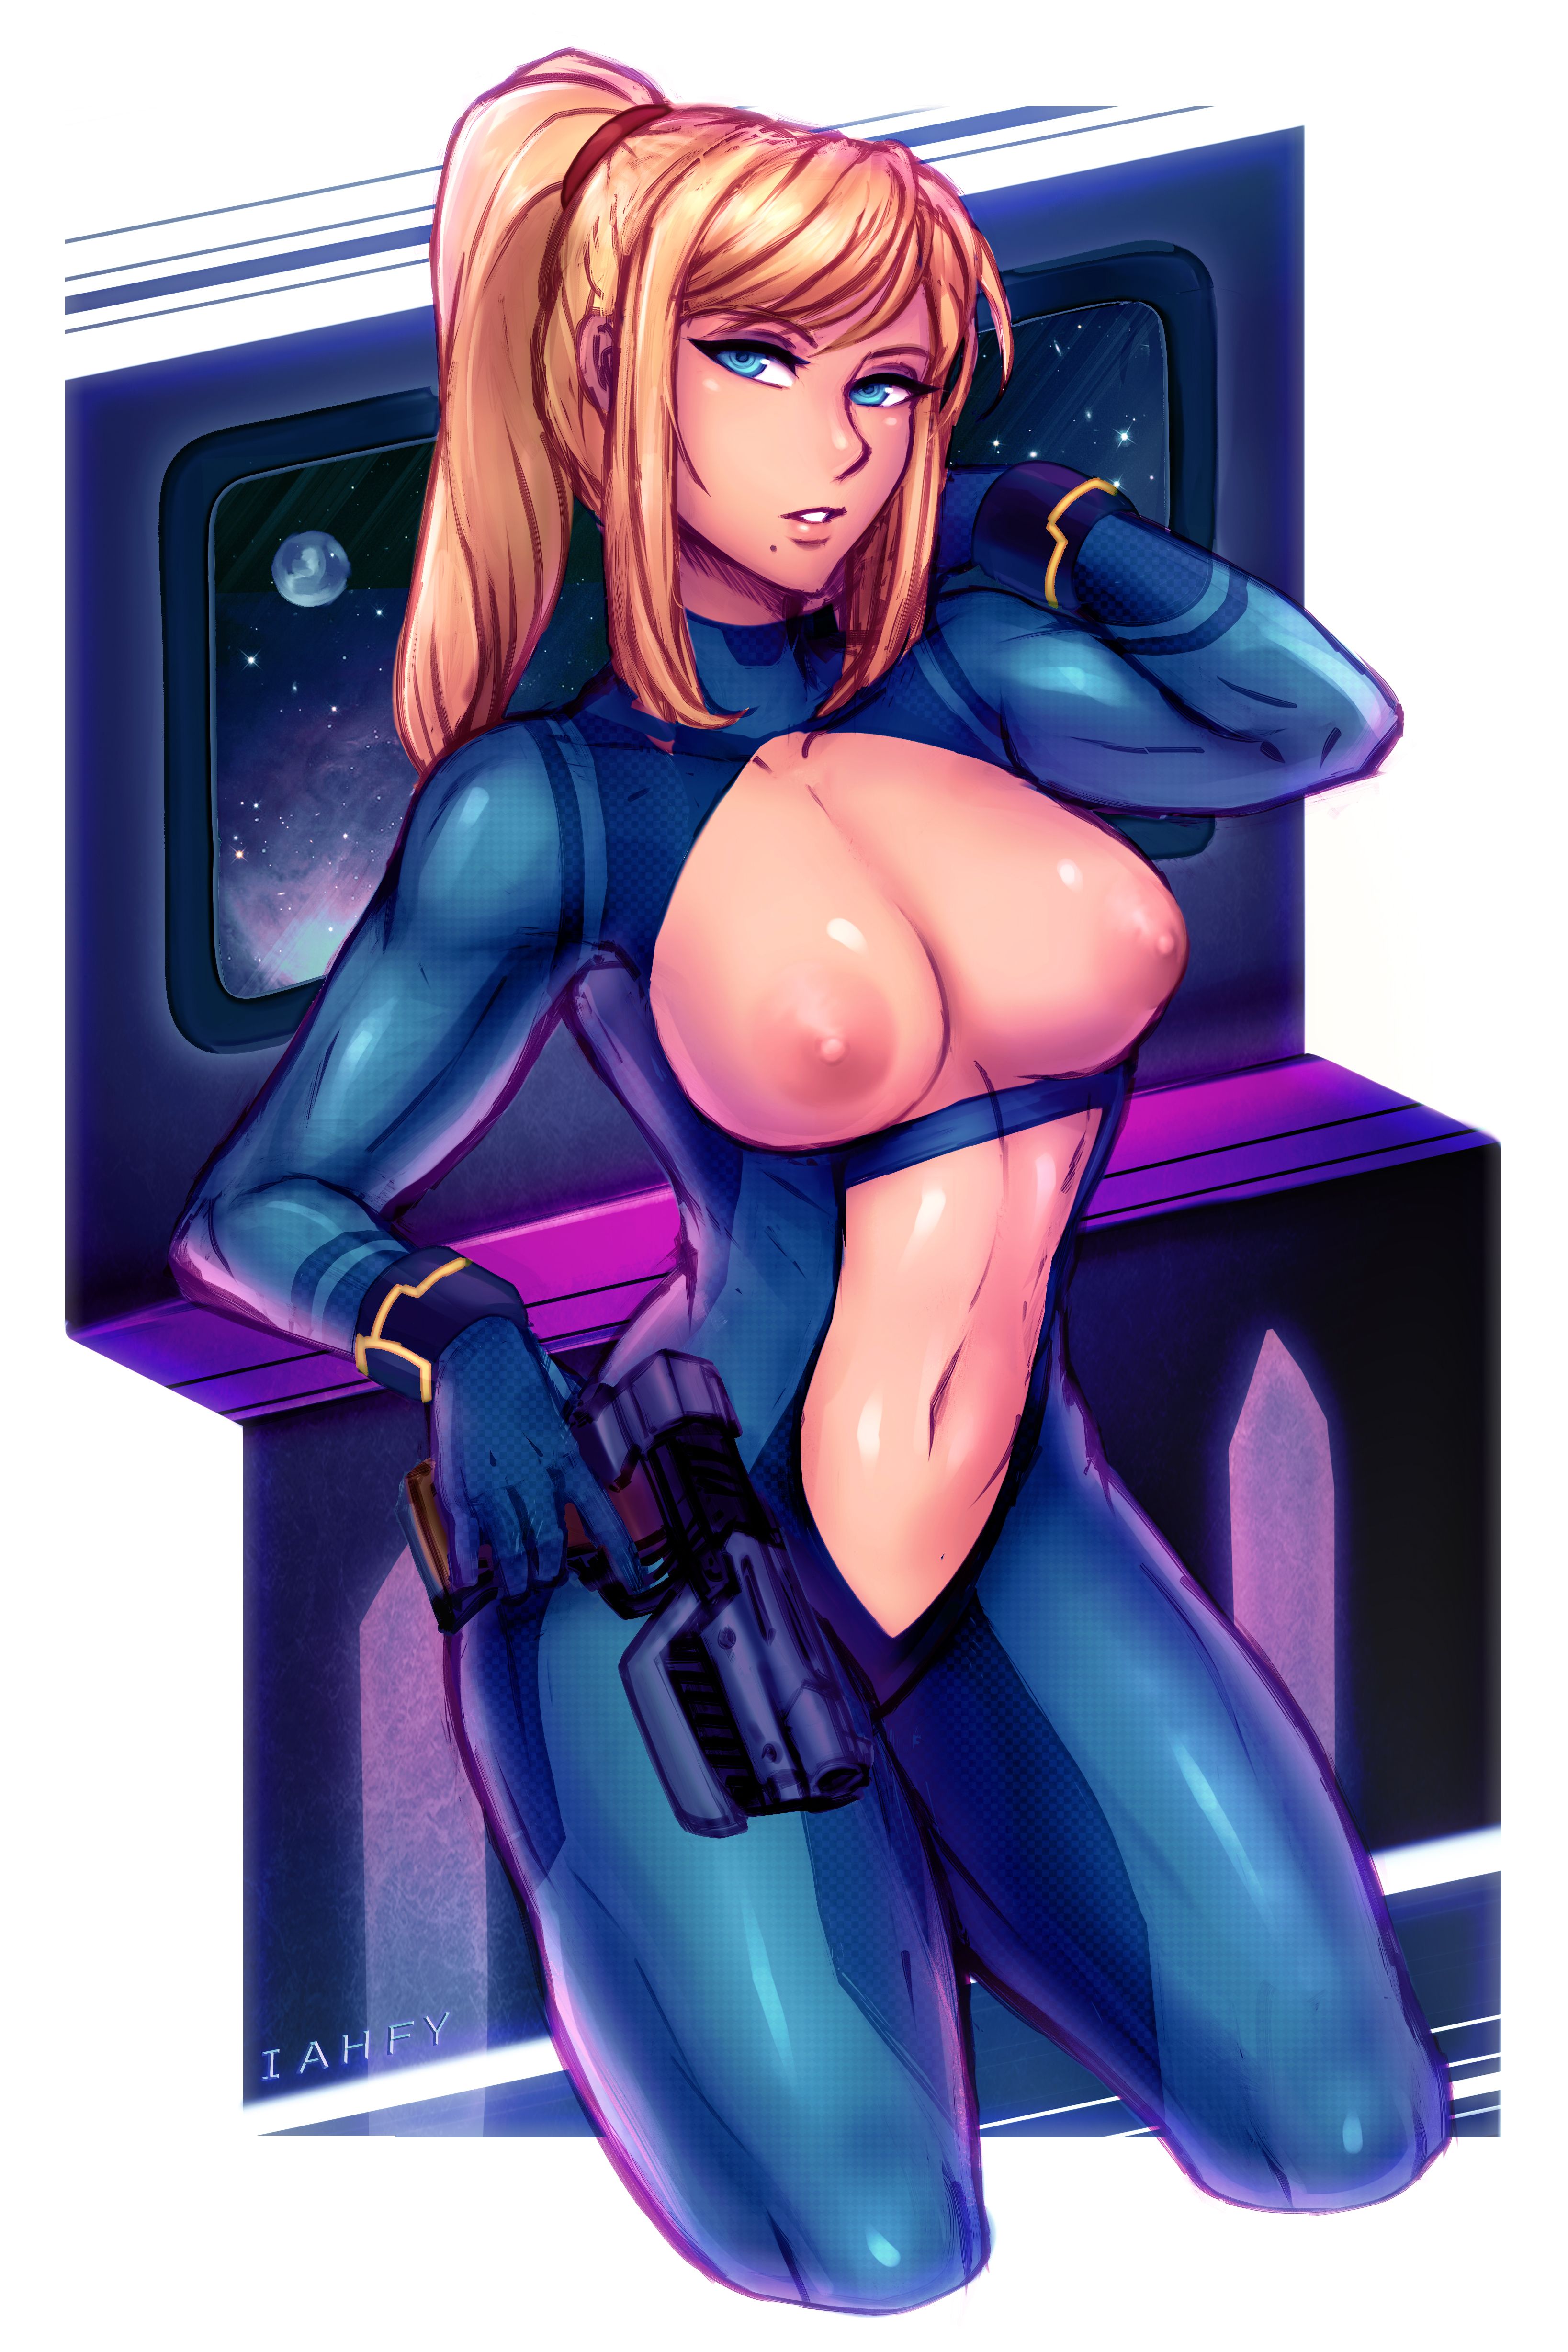 Rule If It Exists There Is Porn Of It Iahfy Samus Aran Zero